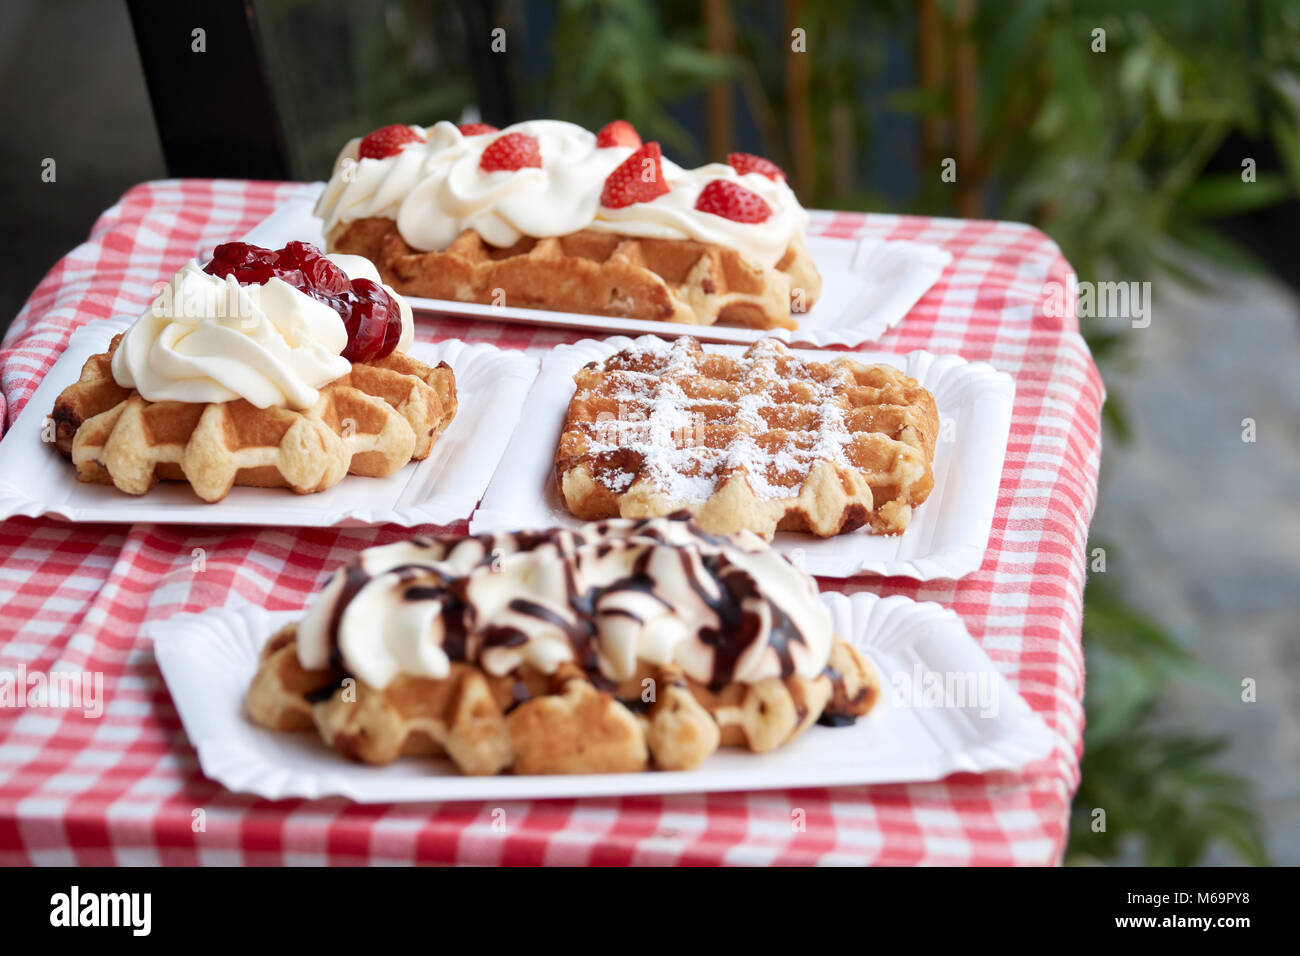 Popular national dish Belgian waffles with strawberries, cherries, chocolate and powder in the tourist town of Bruges. Stock Photo